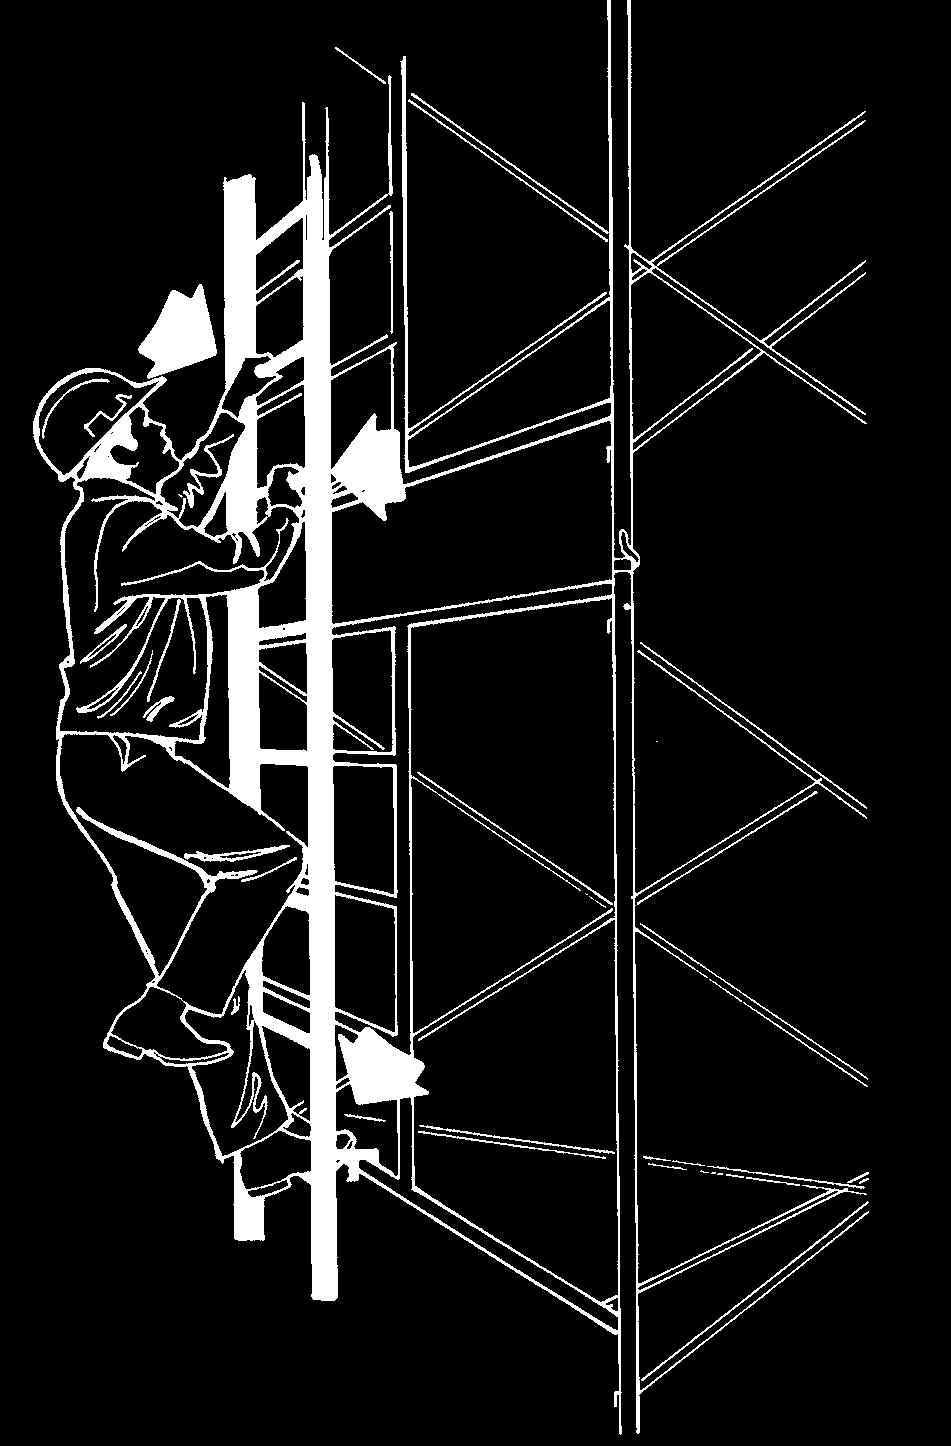 With some types of platform panels you can do this with wire or nails (Figure 21-35). Falls often happen when workers are getting on or off the ladder at the platform level.